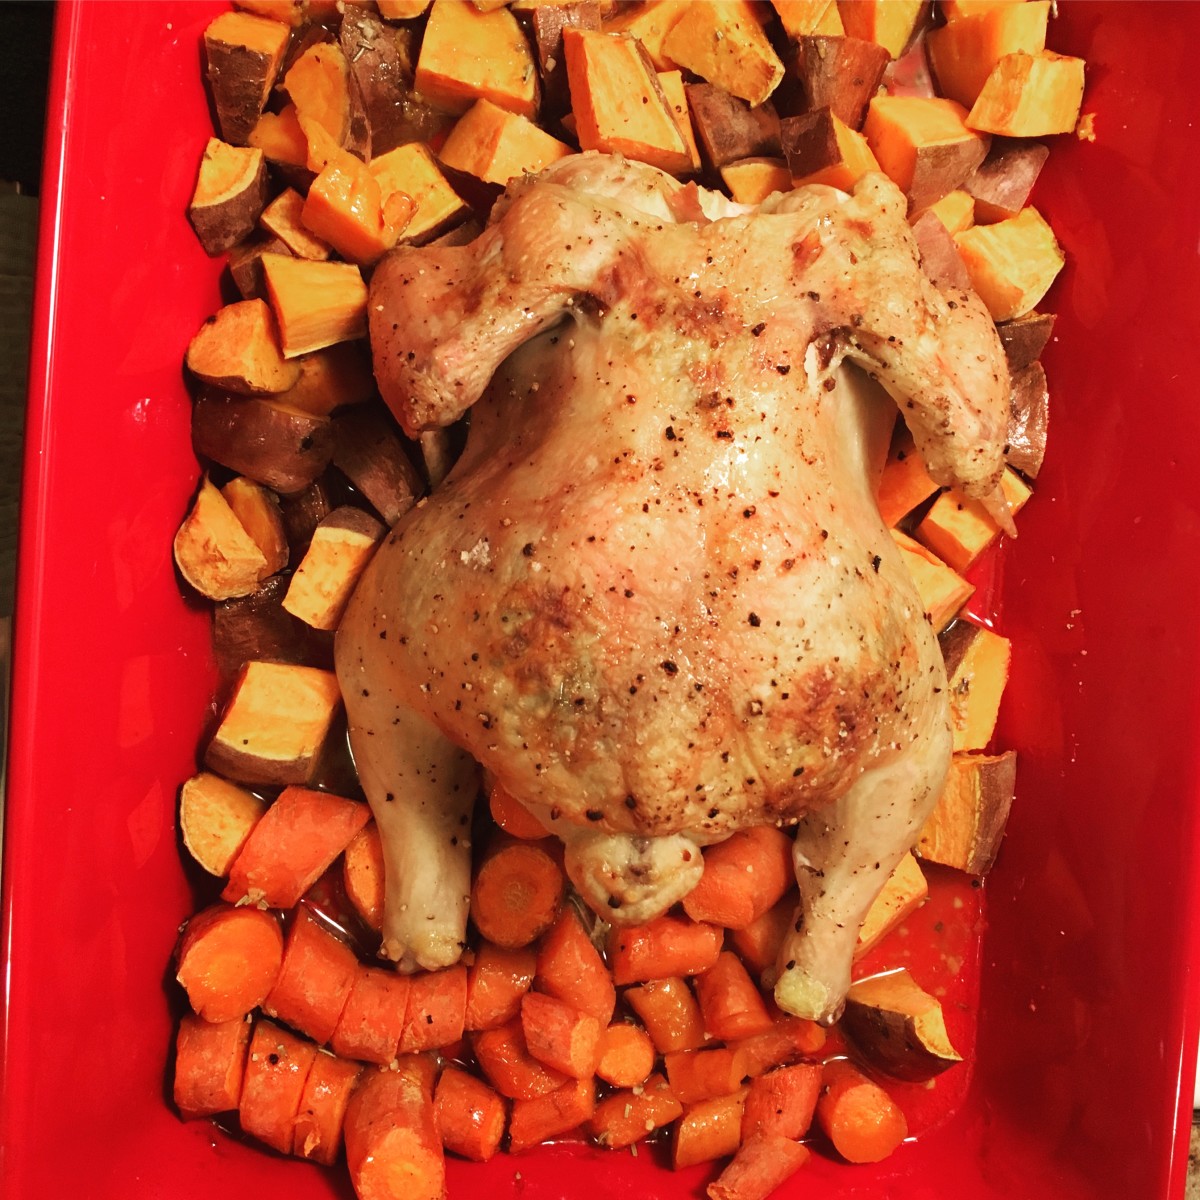 A Beginners' Guide to Perfect Roast Chicken